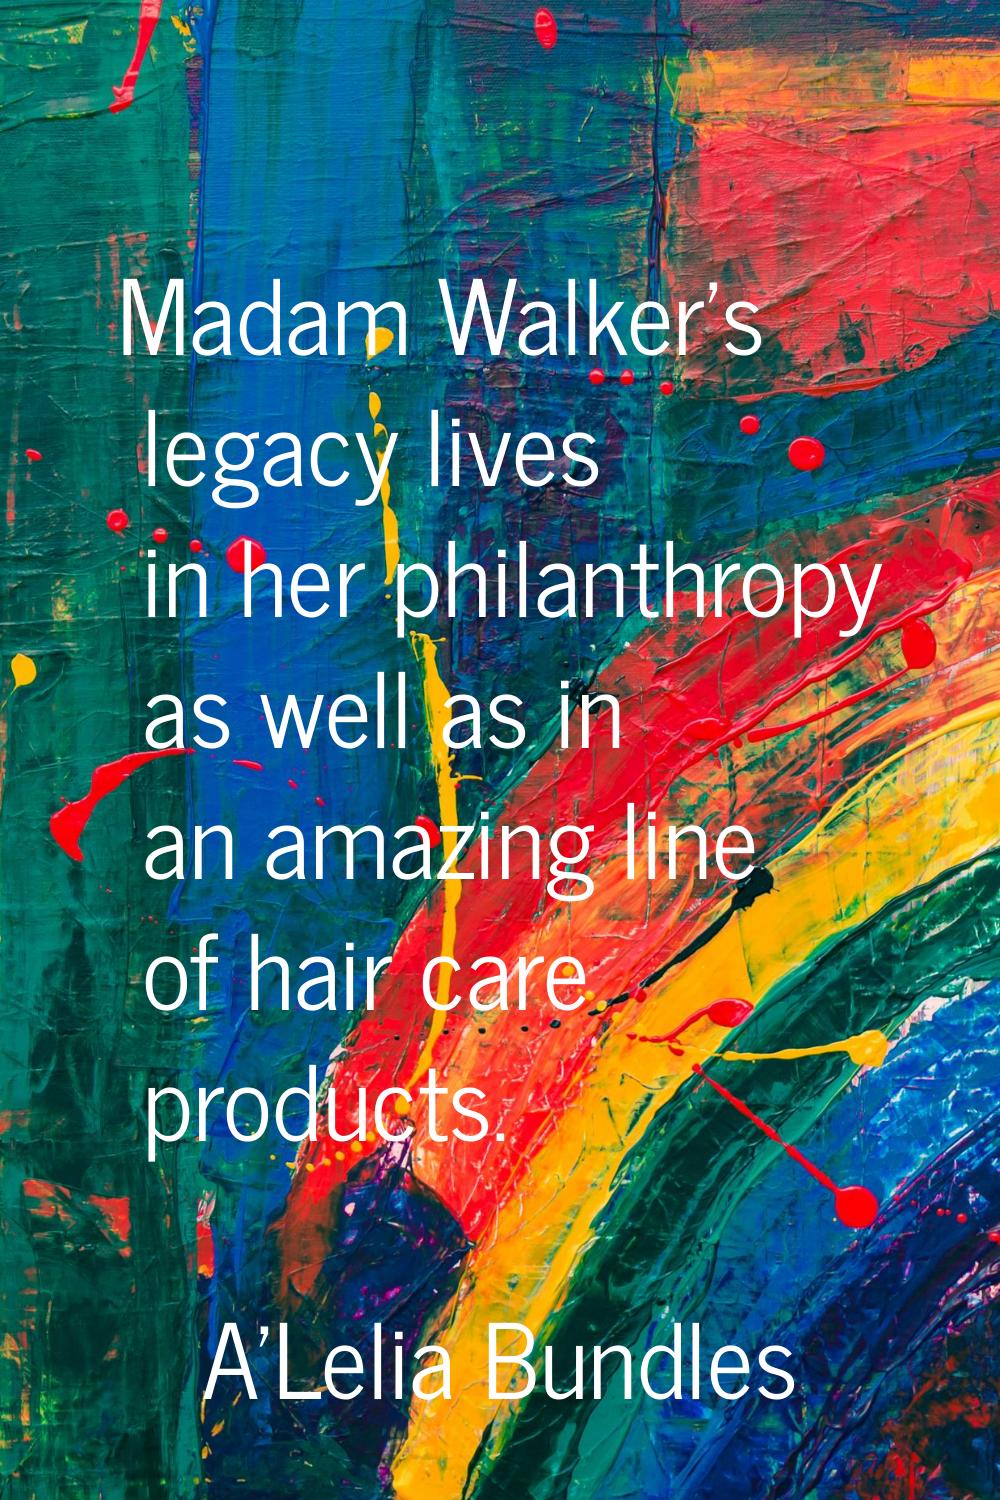 Madam Walker's legacy lives in her philanthropy as well as in an amazing line of hair care products